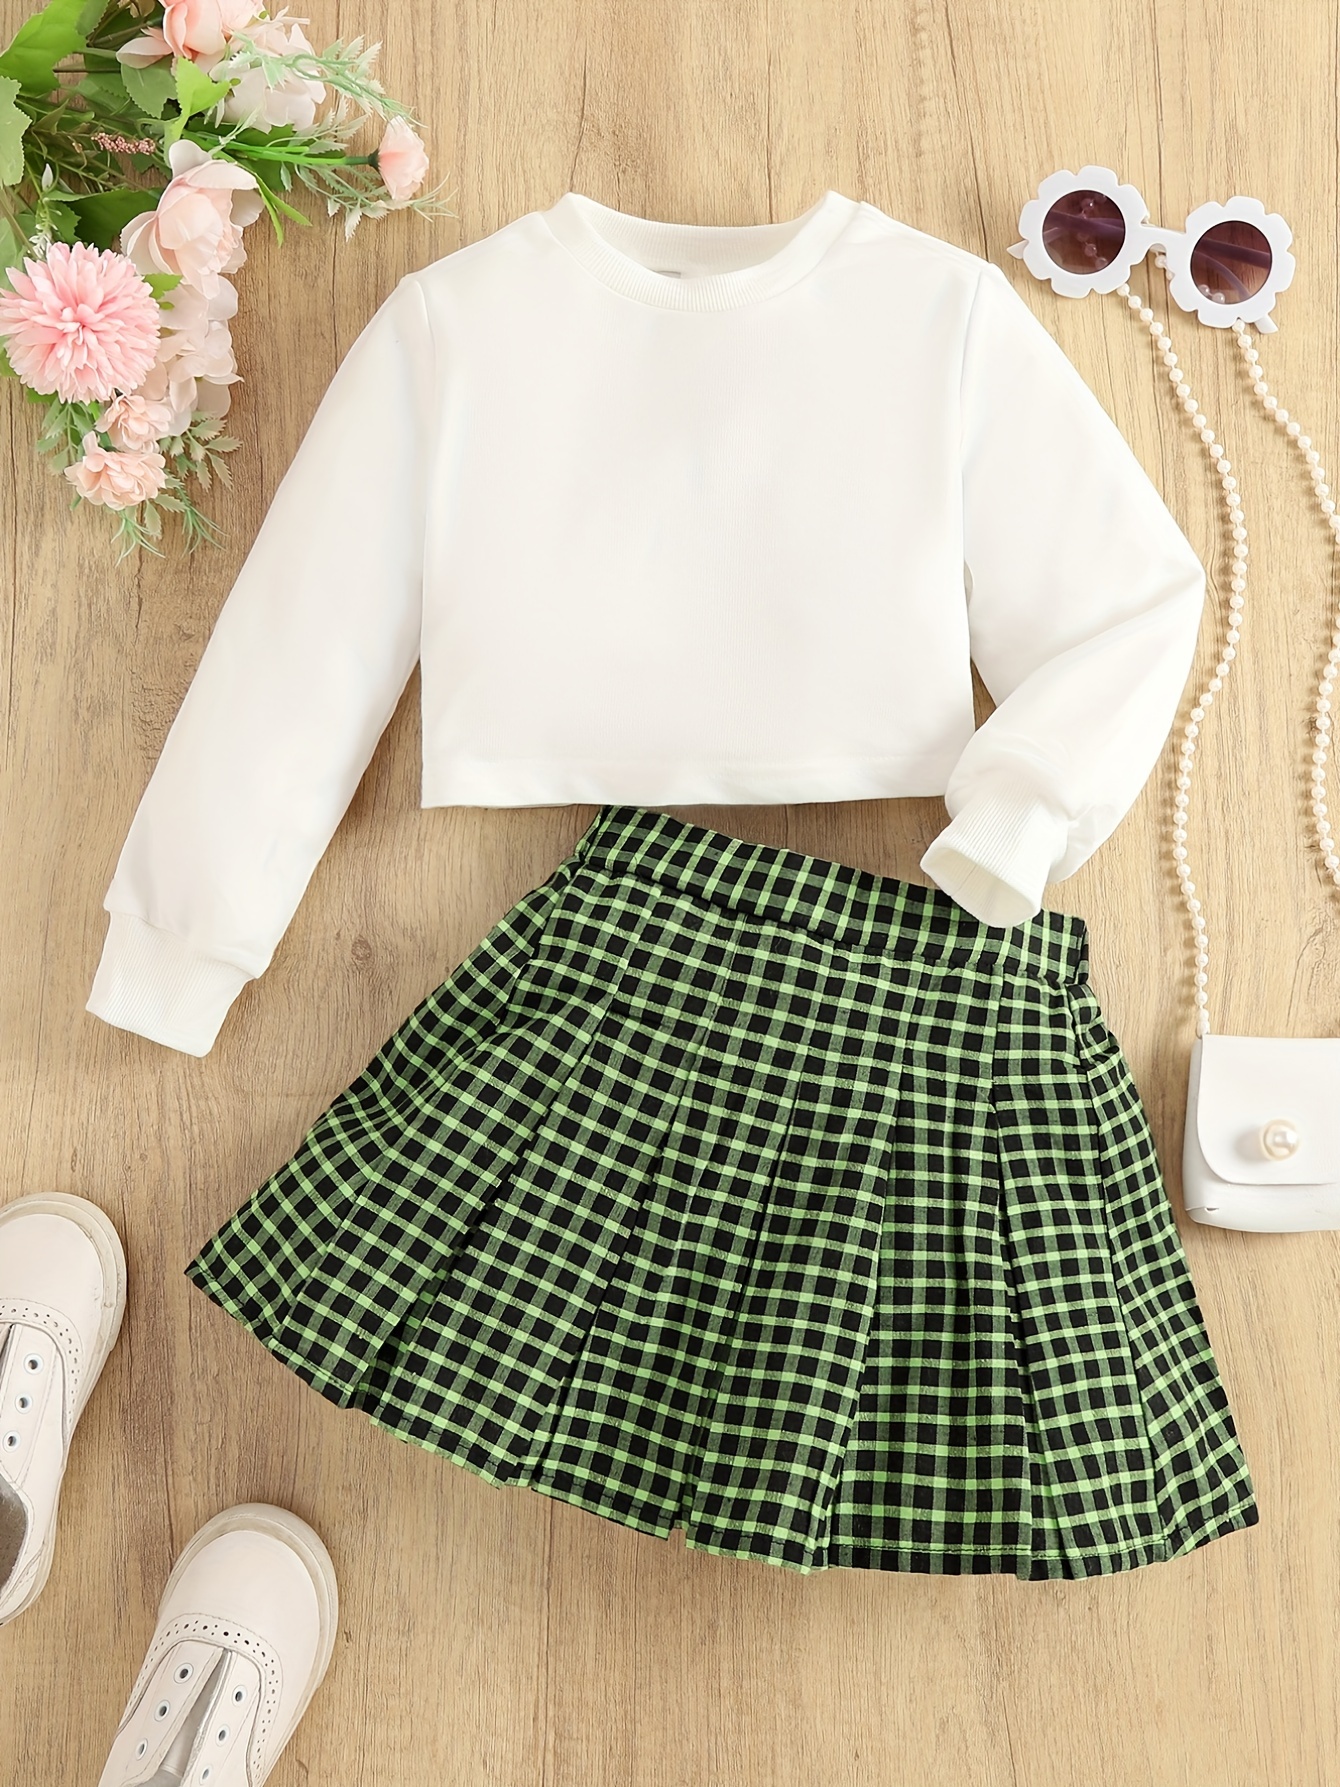 2pcs Girl's Preppy Style Outfit, Bear Pattern Sweatshirt & Pleated Skirt  Set, LOS ANGELES Print Casual Long Sleeve Top, Kid's Clothes For Spring Fall